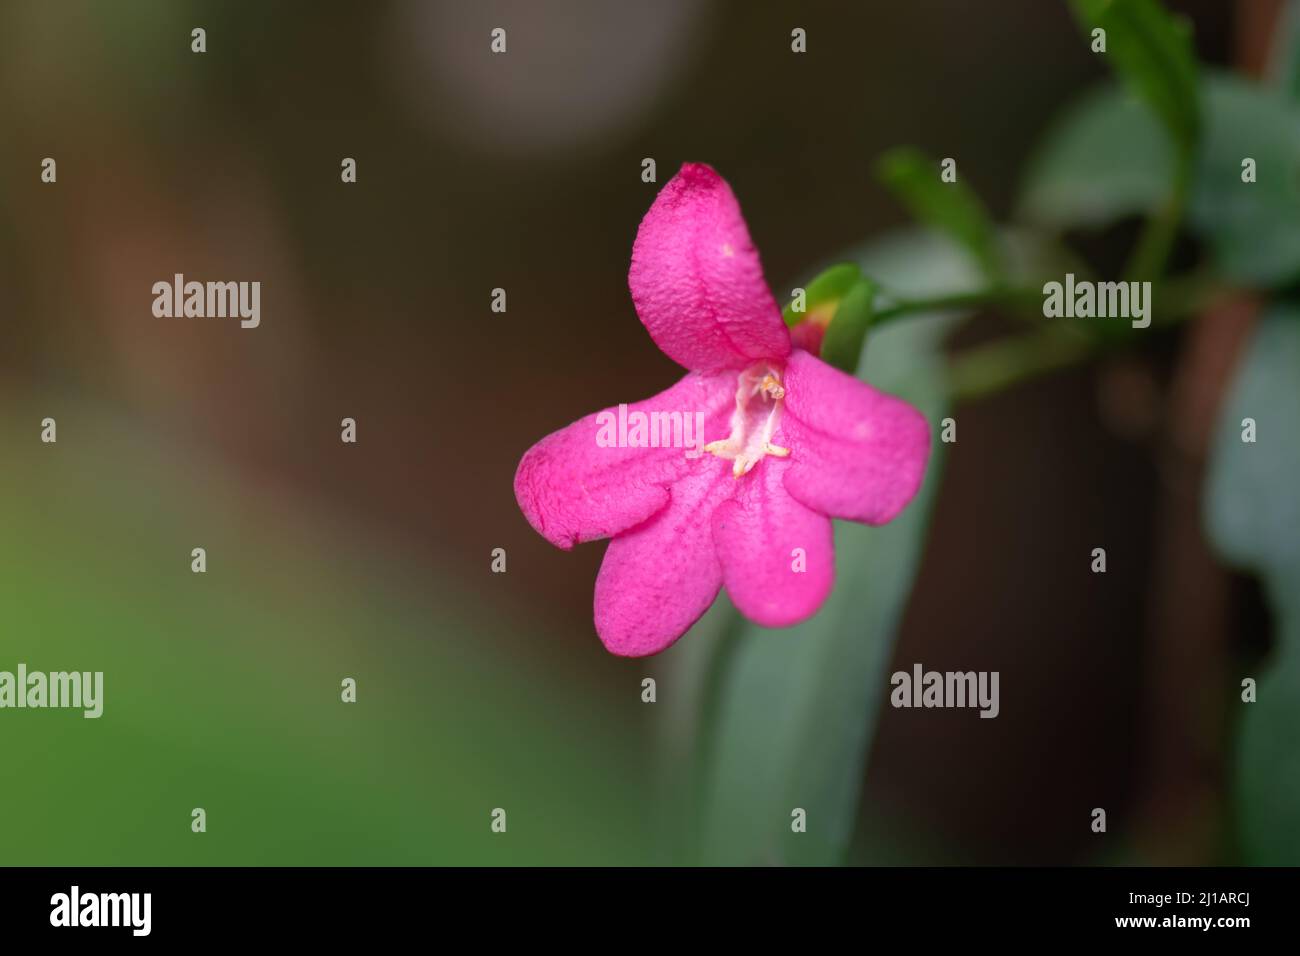 Pink colored single flower with selective commonly known as Lemonia and also known as Limonia, Pink Ravenia. Scientific name is Ravenia spectabilis. I Stock Photo